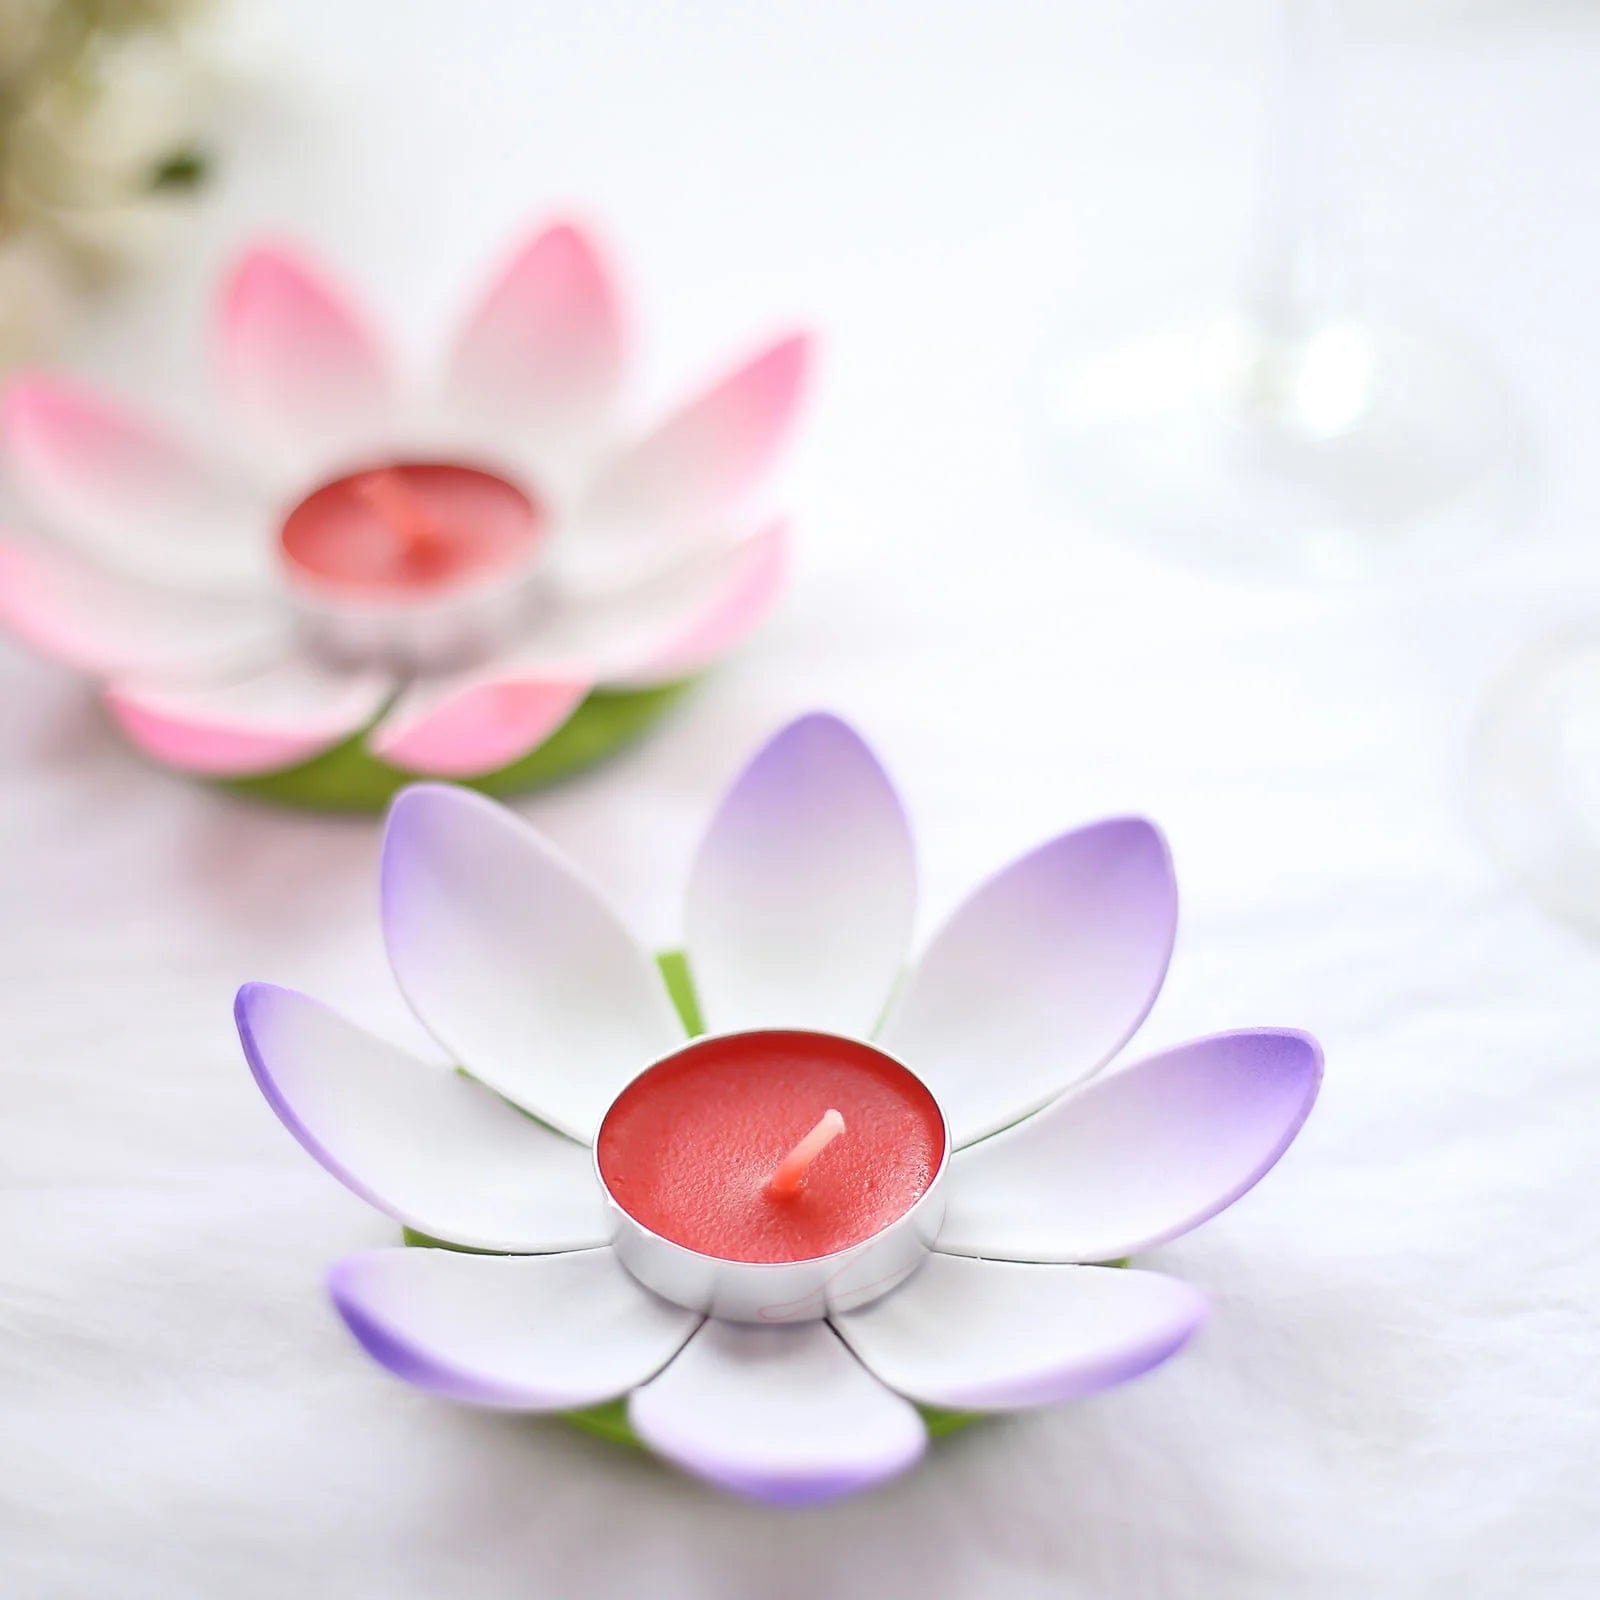 10 Assorted 5 in Colorful Lotus Flower Tealight Floating Candles